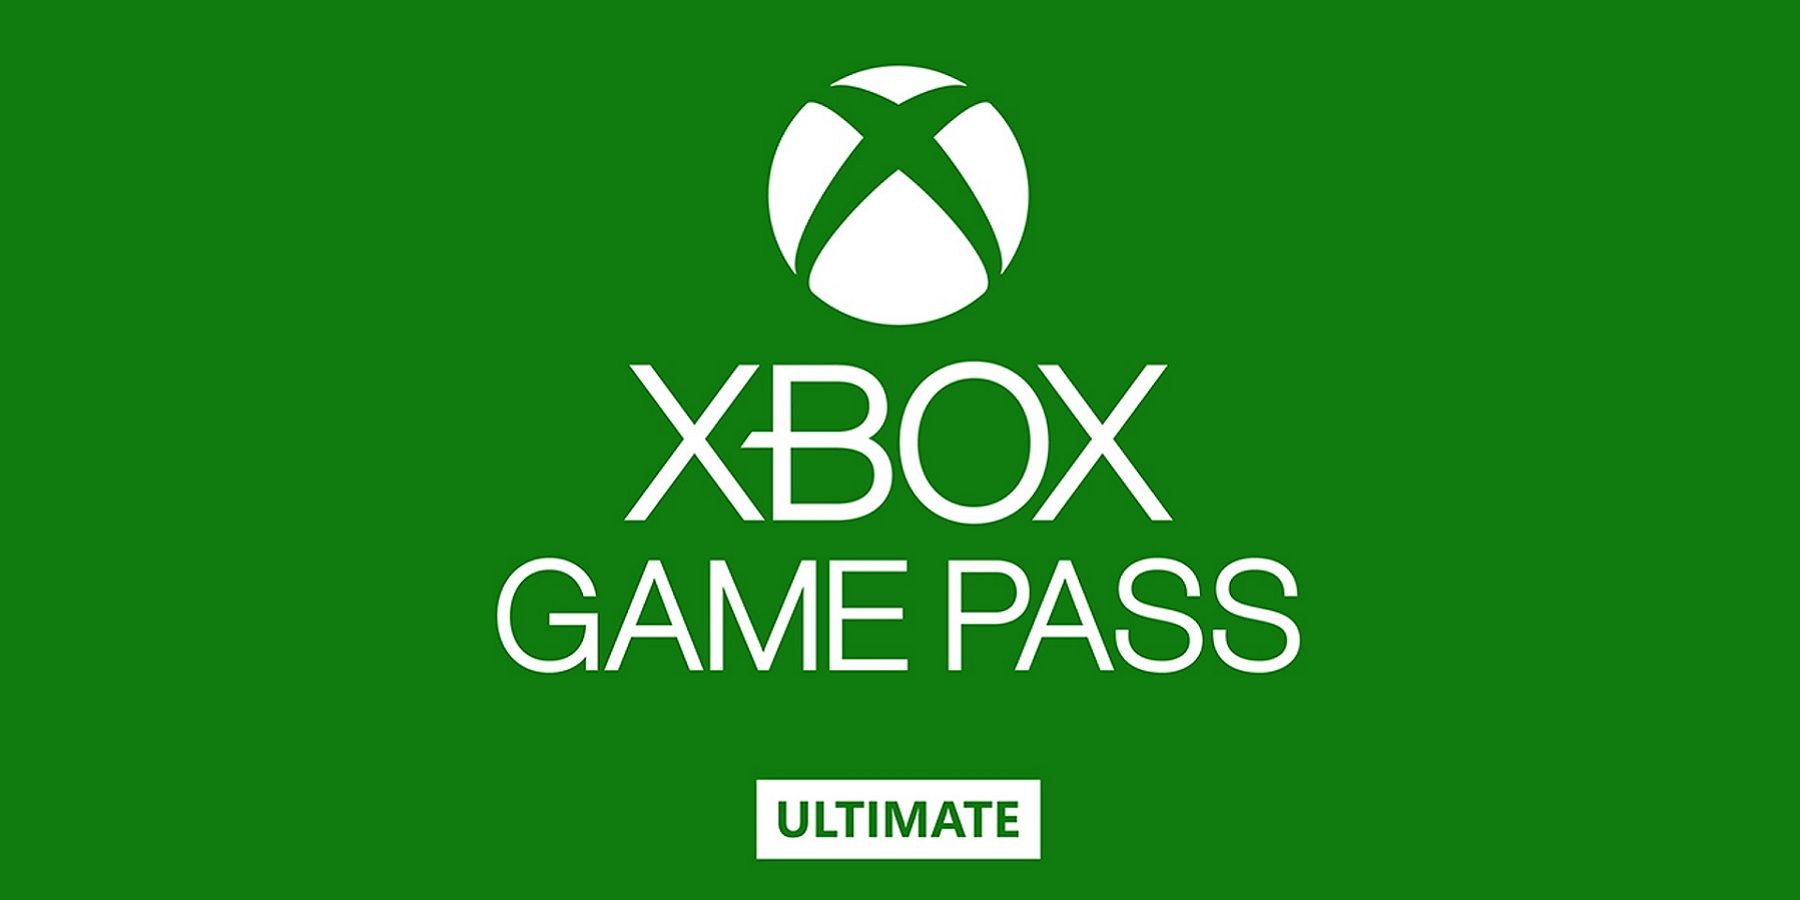 Xbox Game Pass Ultimate Adds 2 New Games